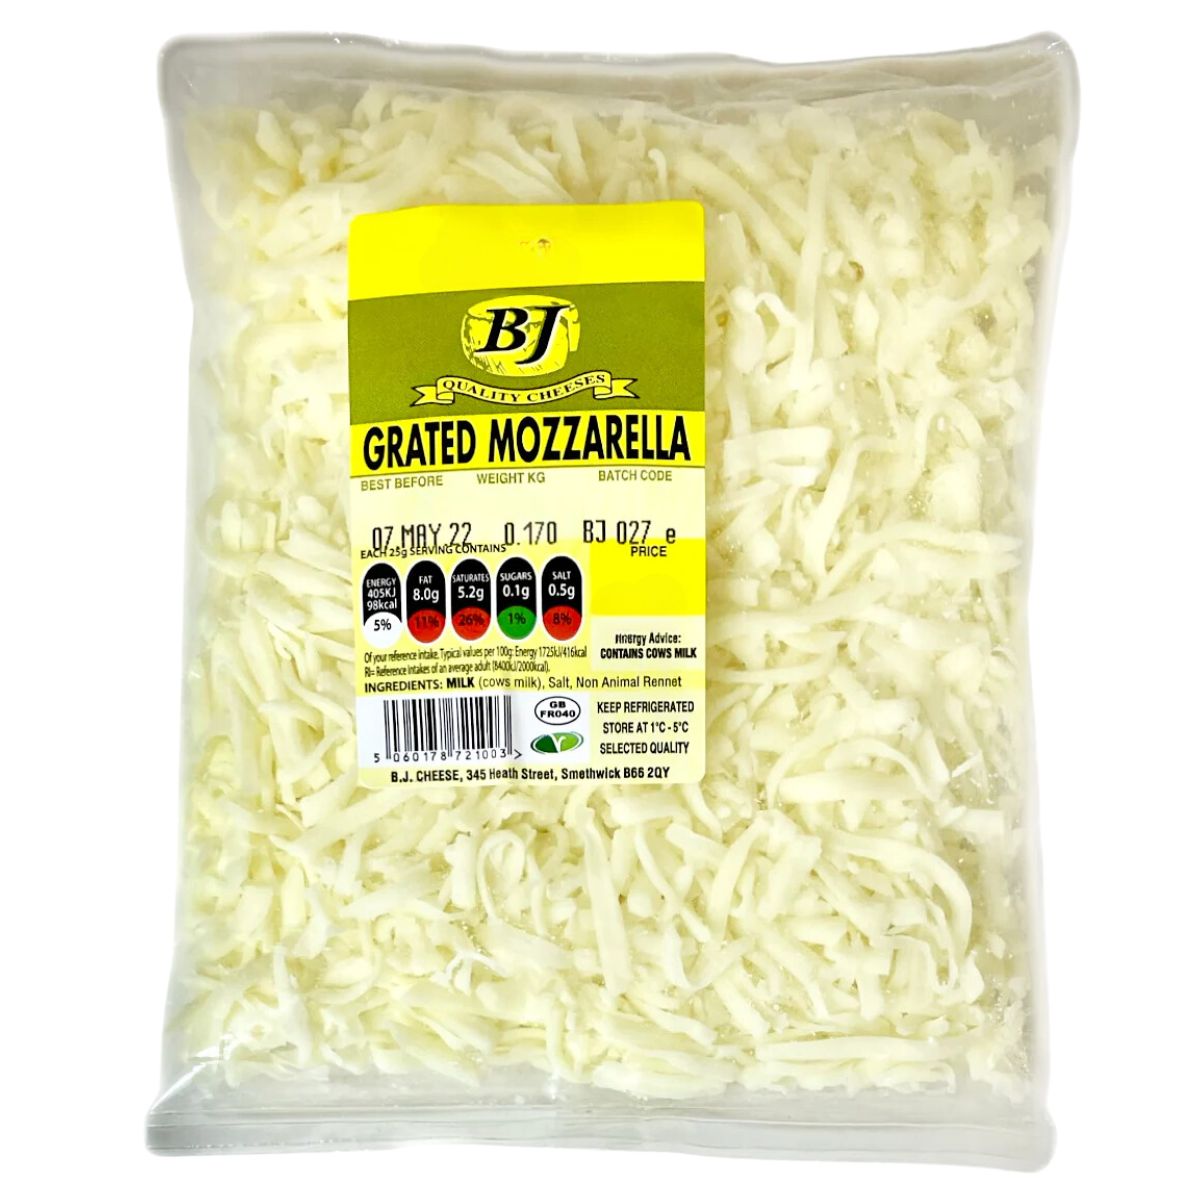 A bag of BJ - Grated Mozzarella Cheese - 170g in a white background.